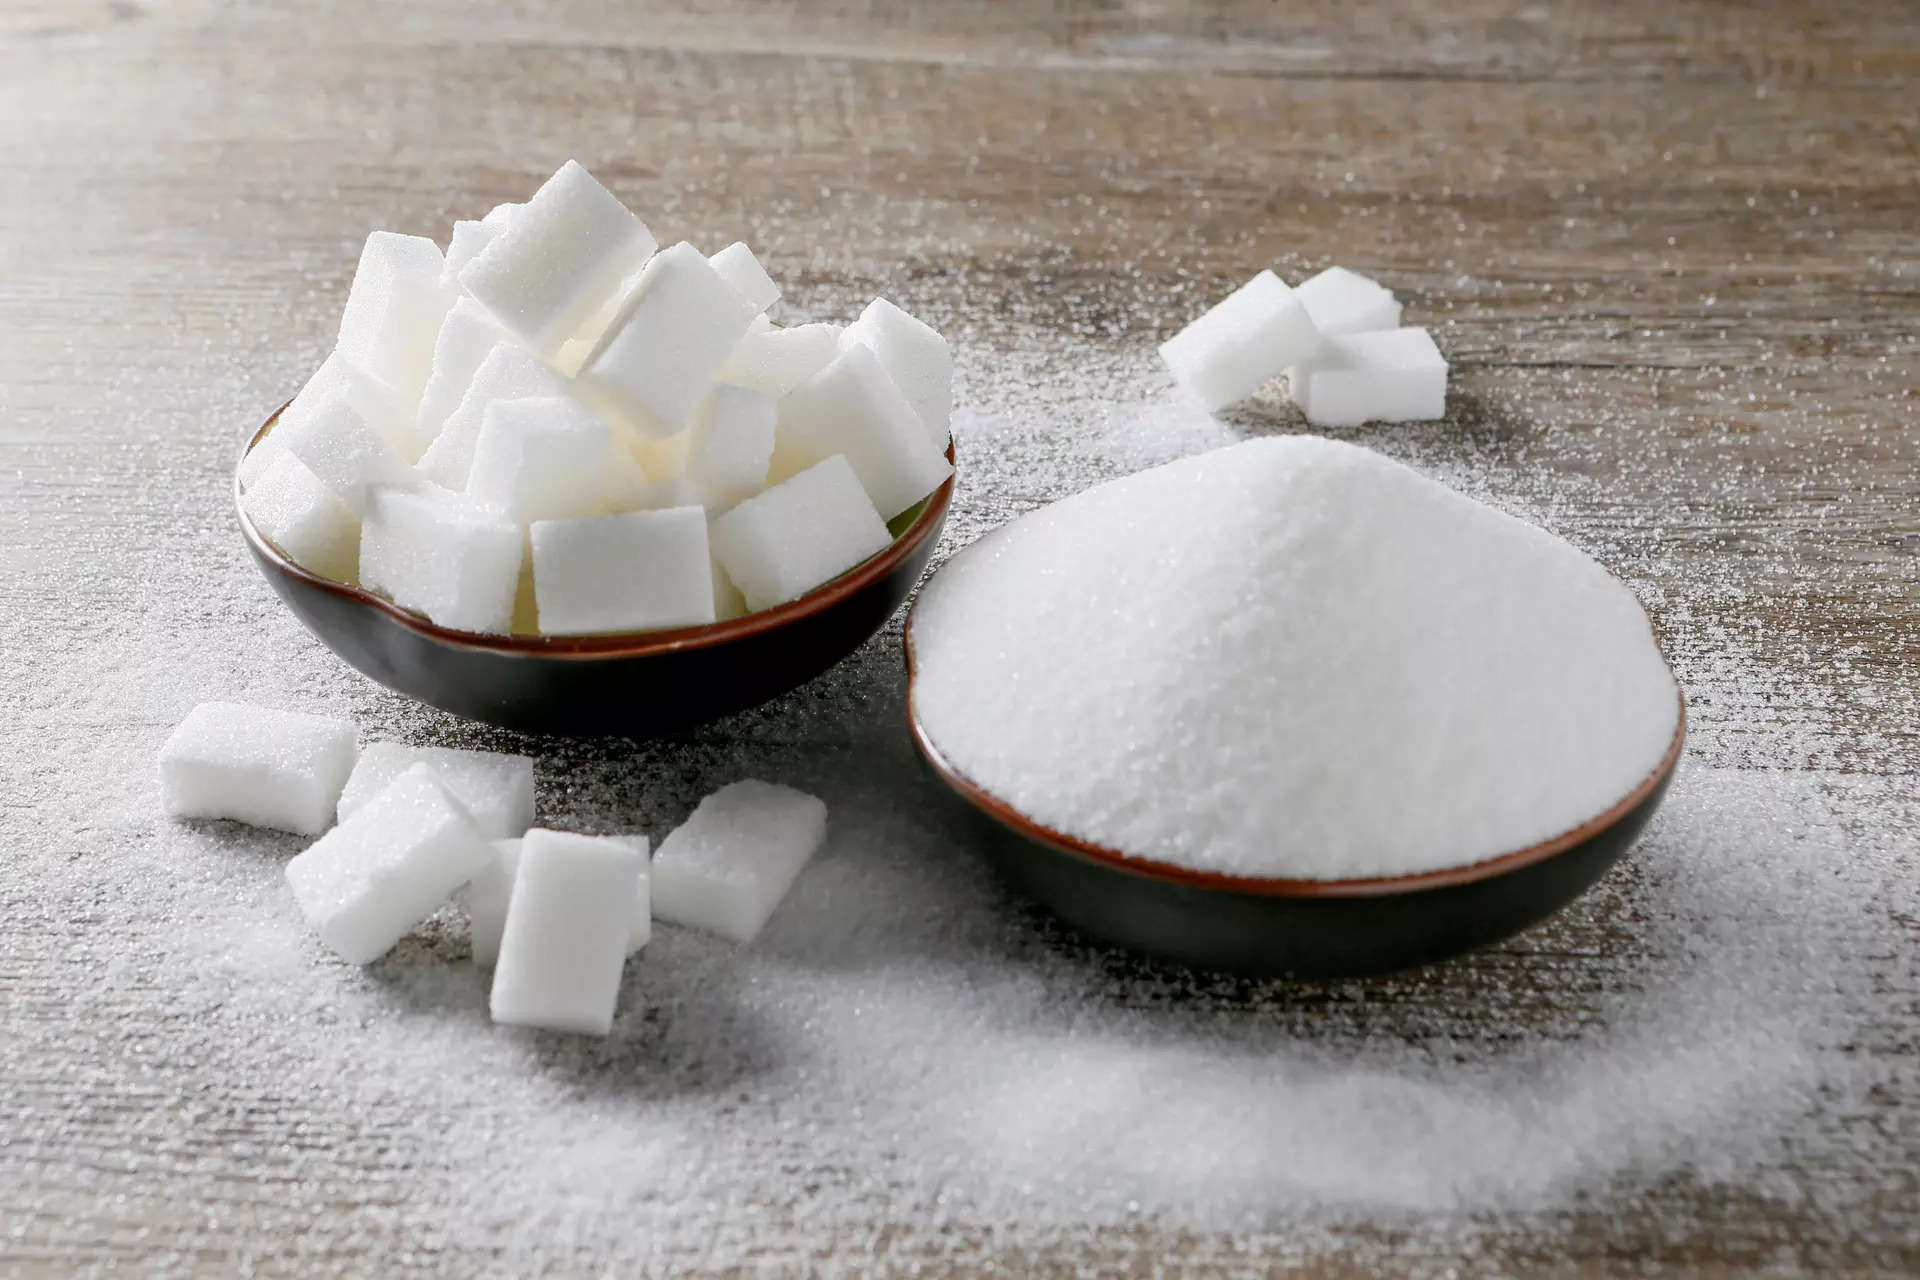 Revenues of sugar companies likely to increase by 10%, sugar prices to stay firm till the start of the next season, says ICRA 